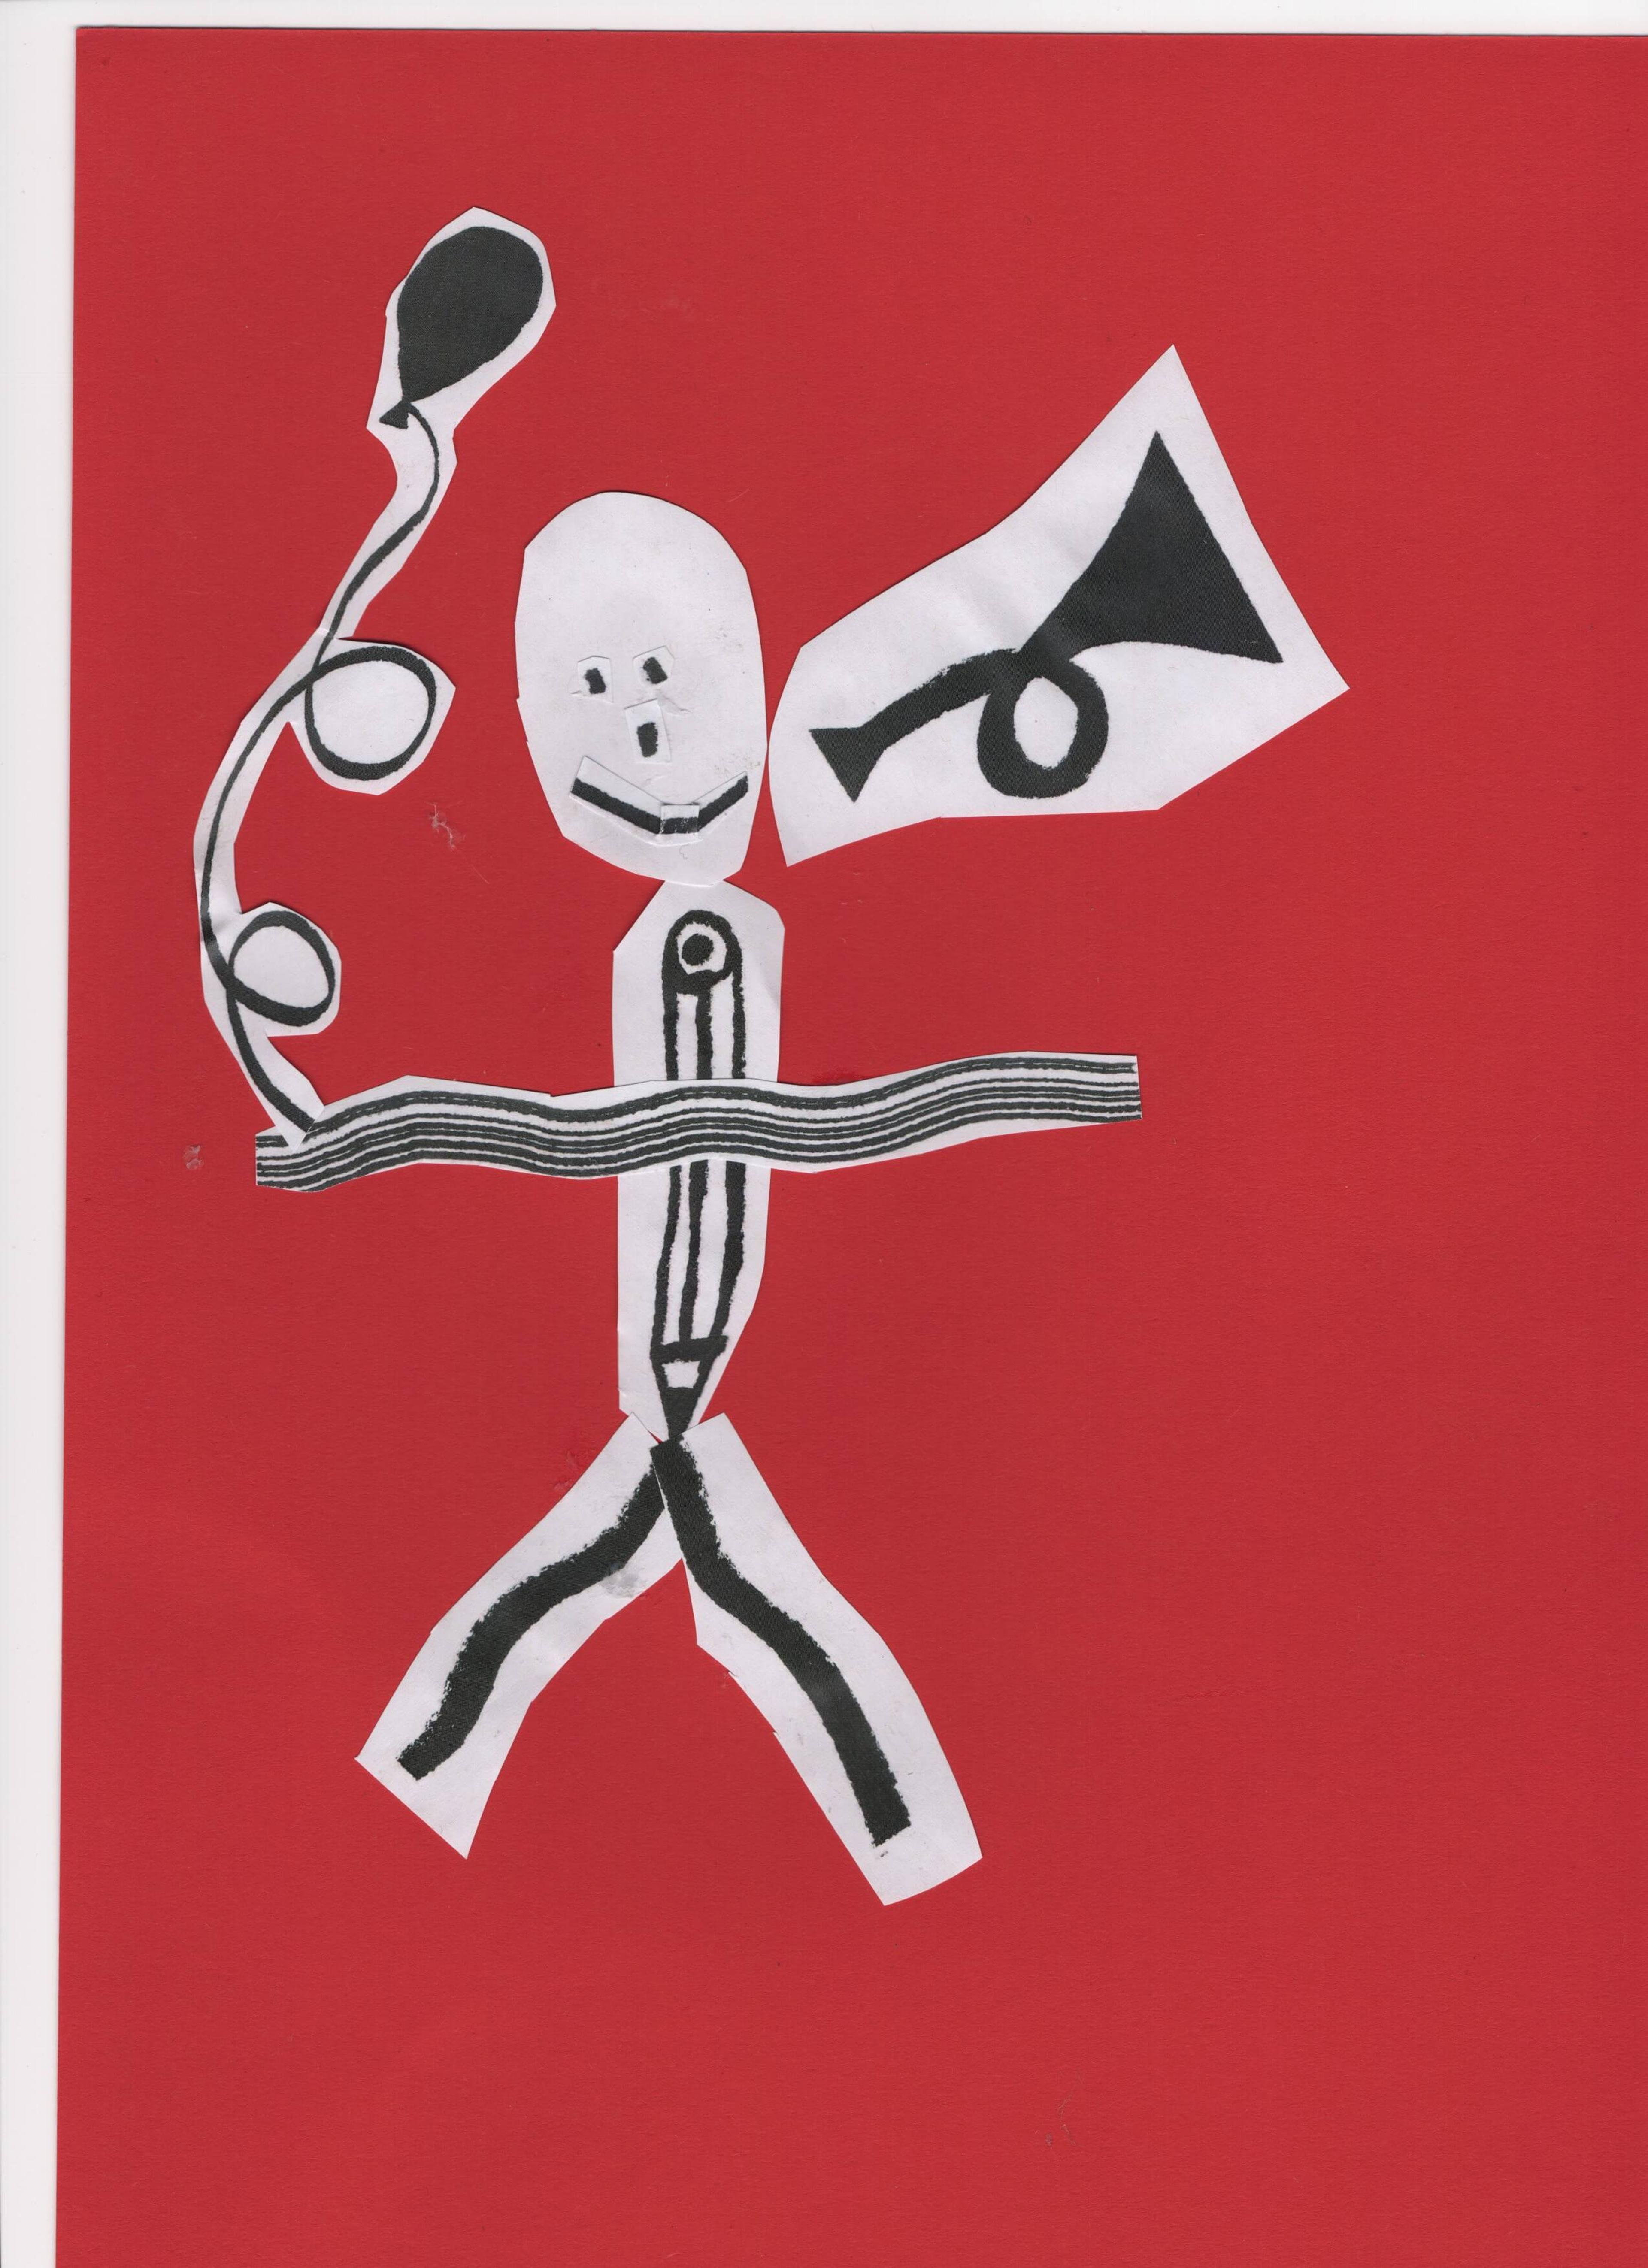 A smiling stickman holding a balloon made using collaged shapes, against red cartridge paper.